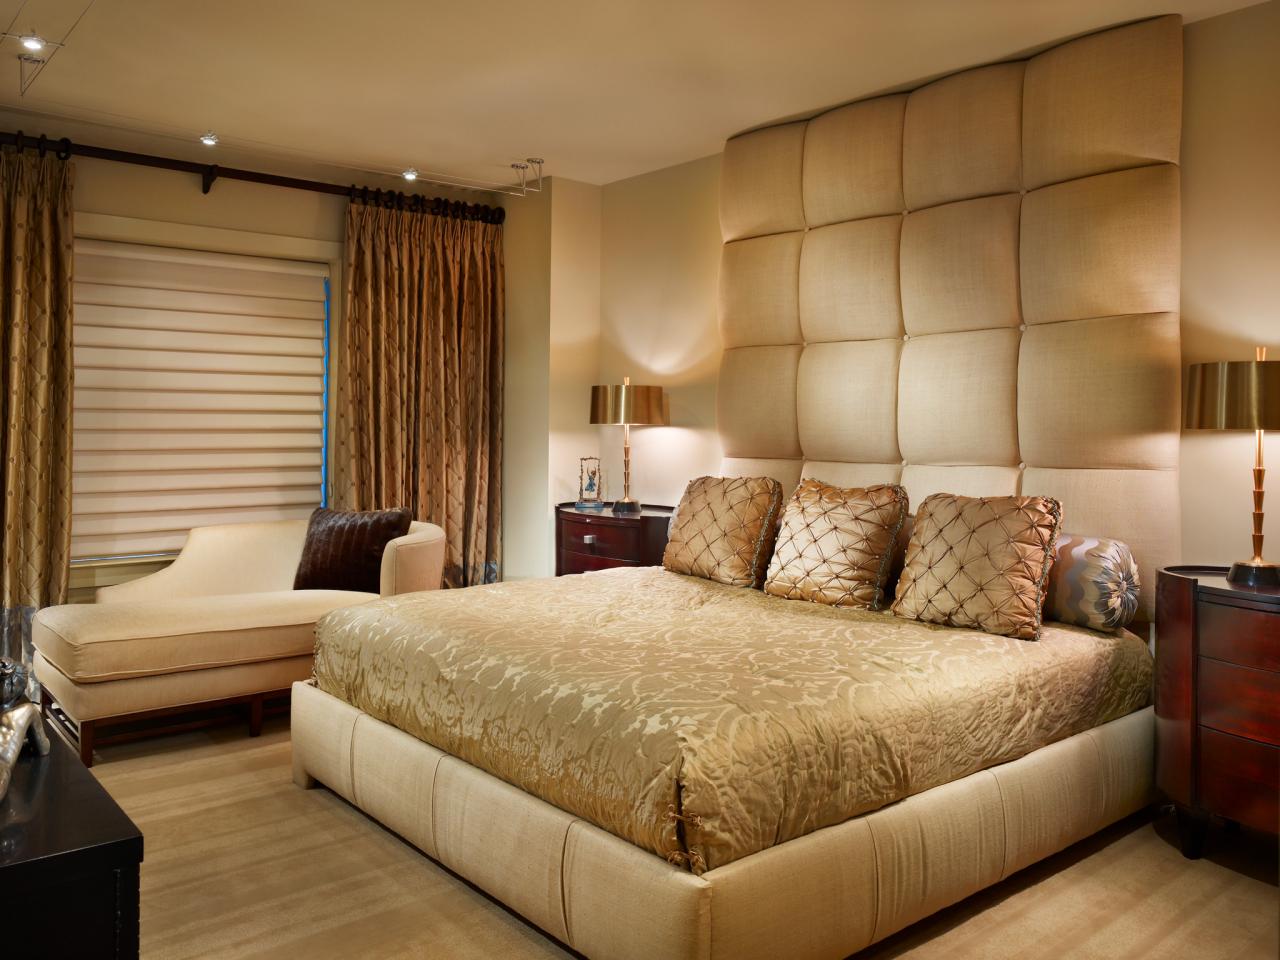 A beige bed adorned with gold accents.